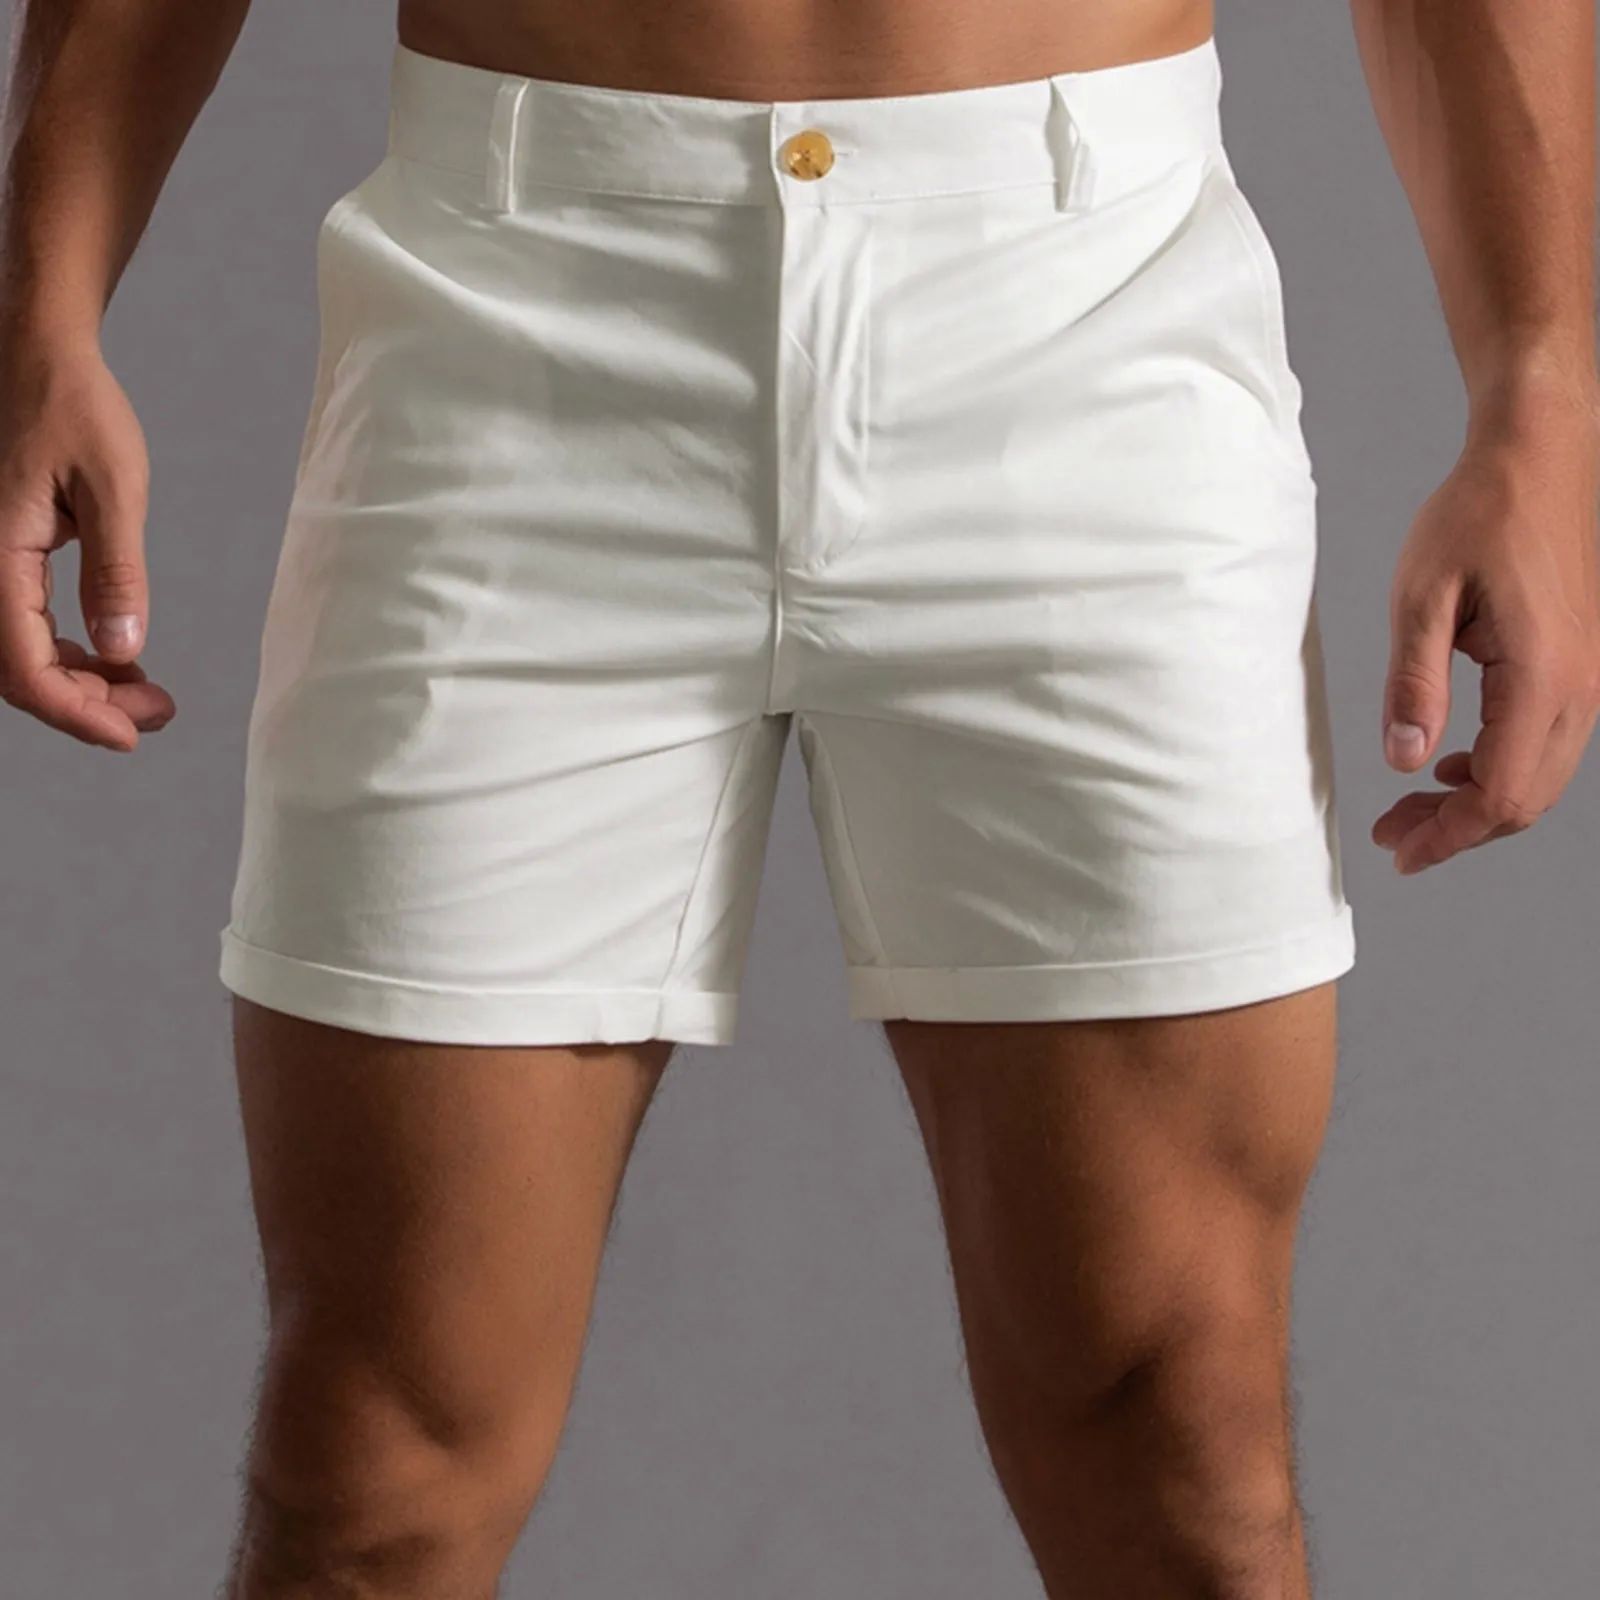 Cotton White? Shorts?hin utton runks?Summer Solid Color Fash